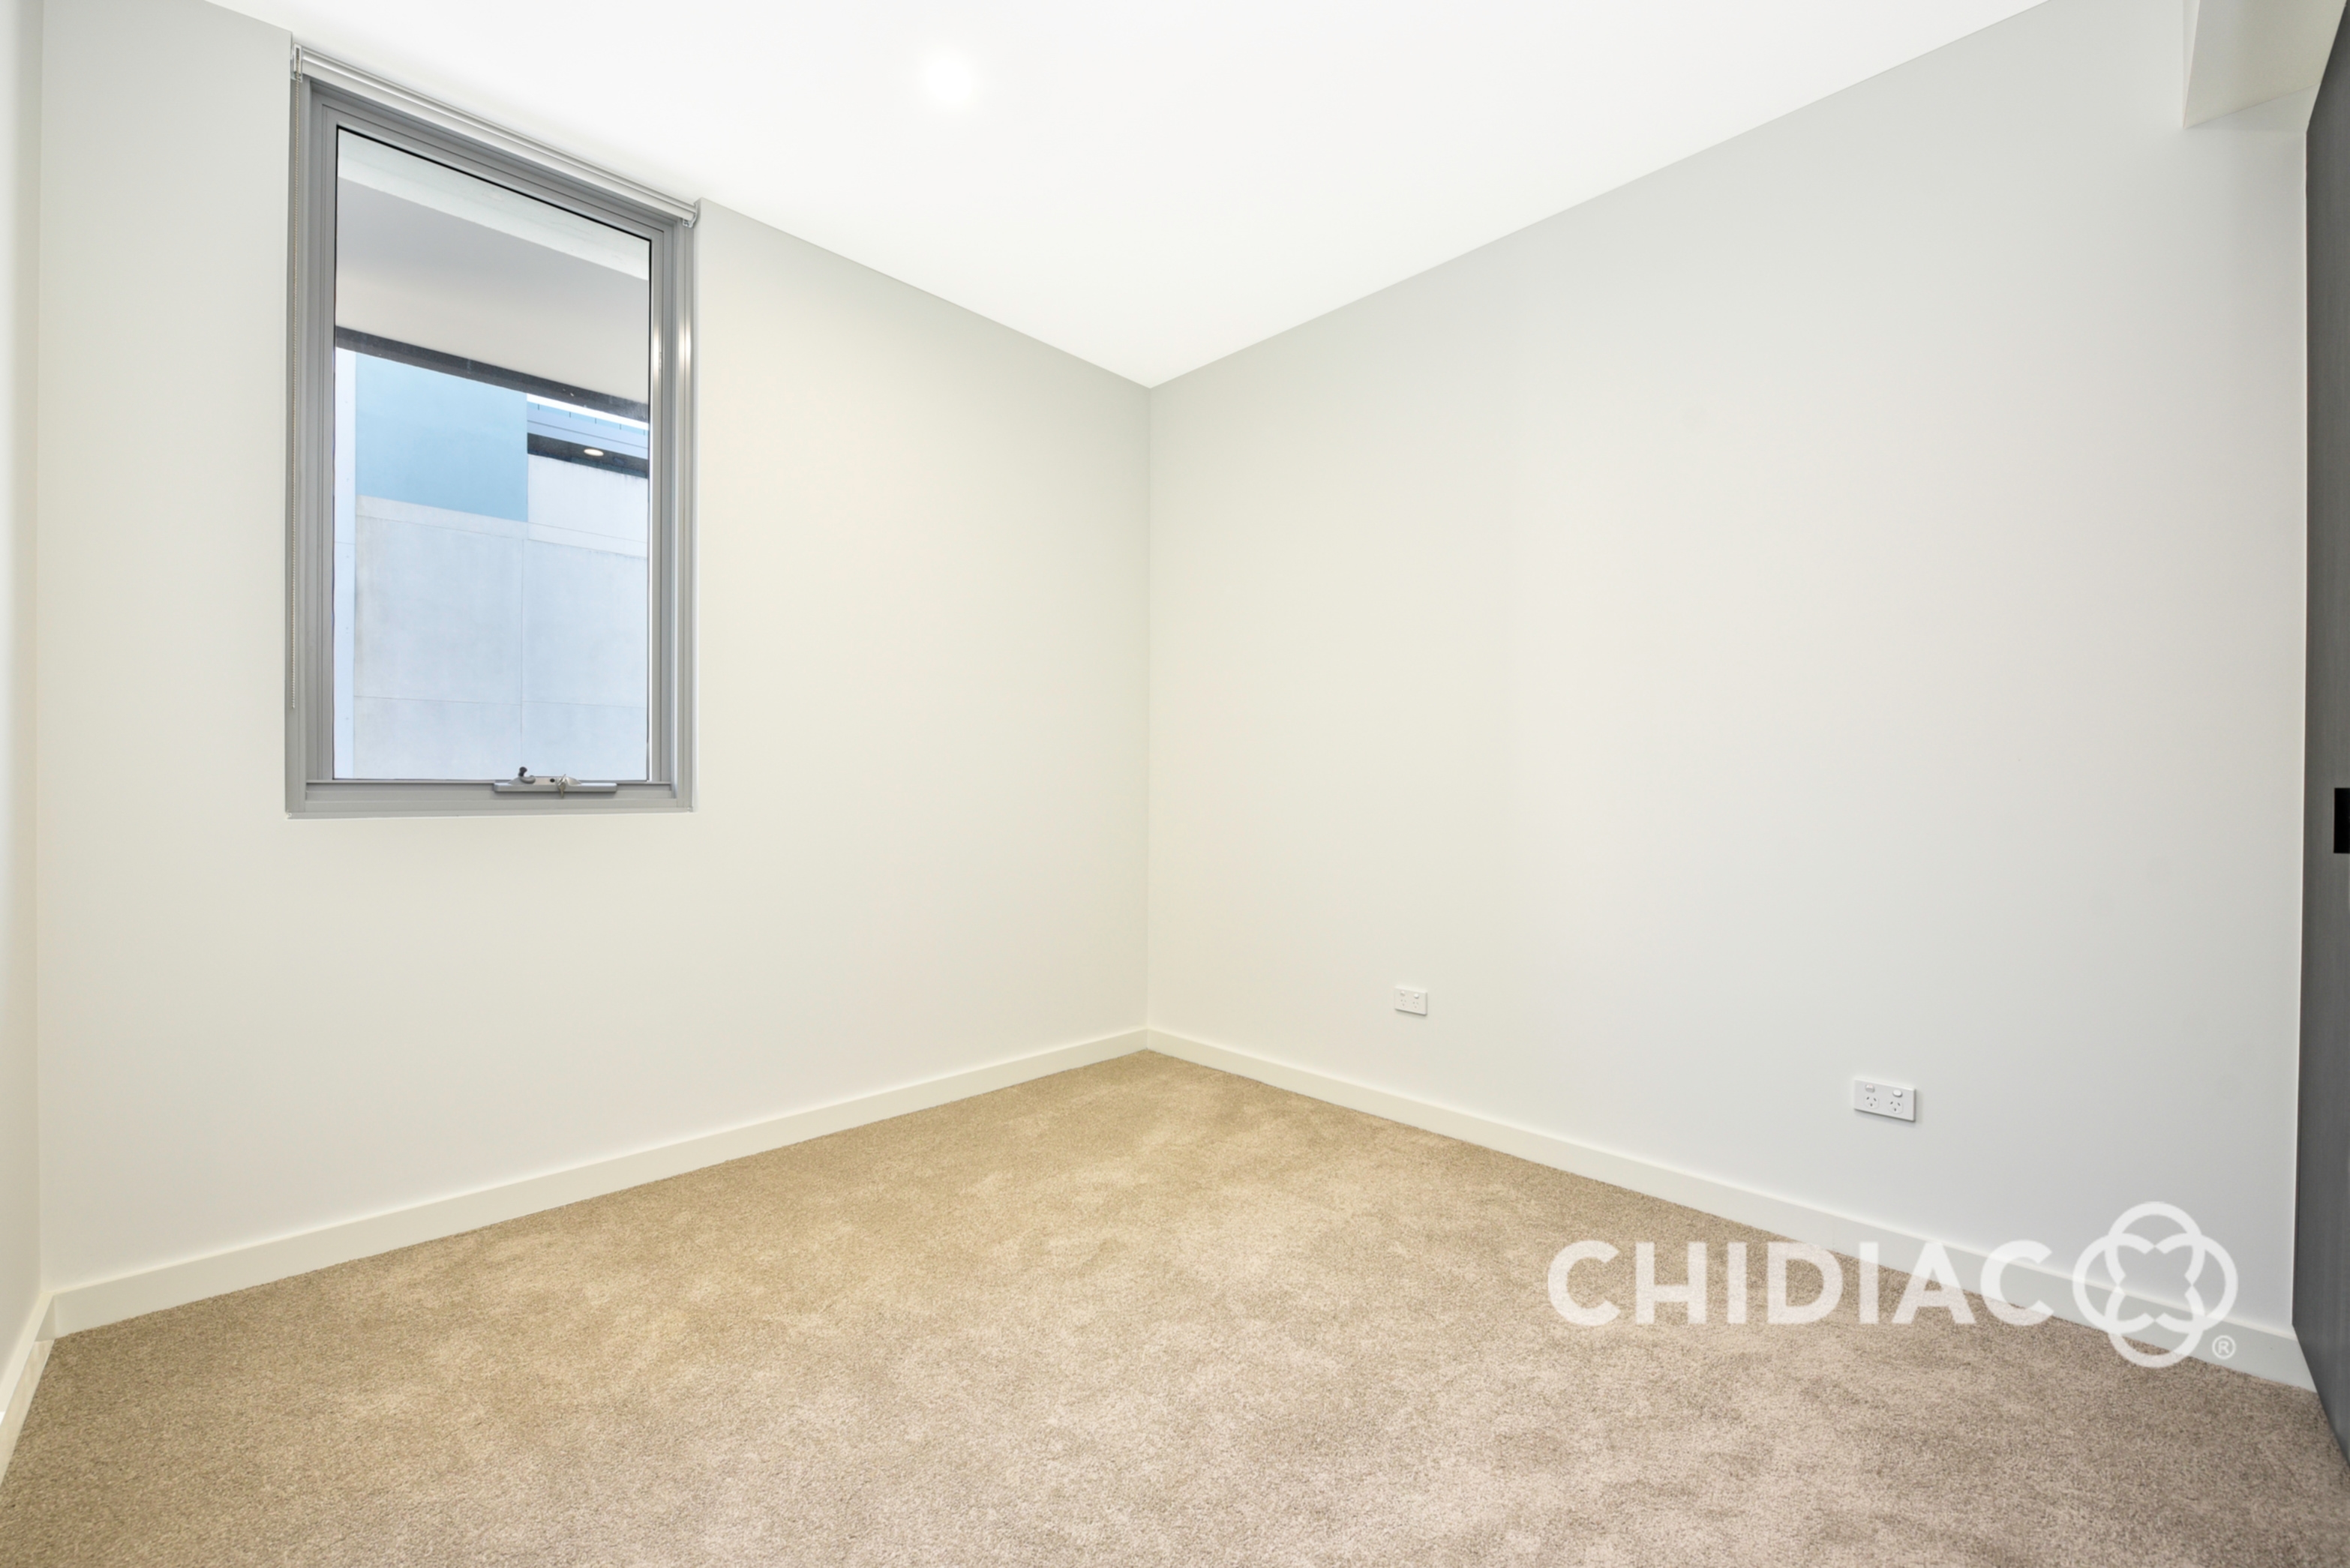 12/123 Bowden Street, Meadowbank Leased by Chidiac Realty - image 5